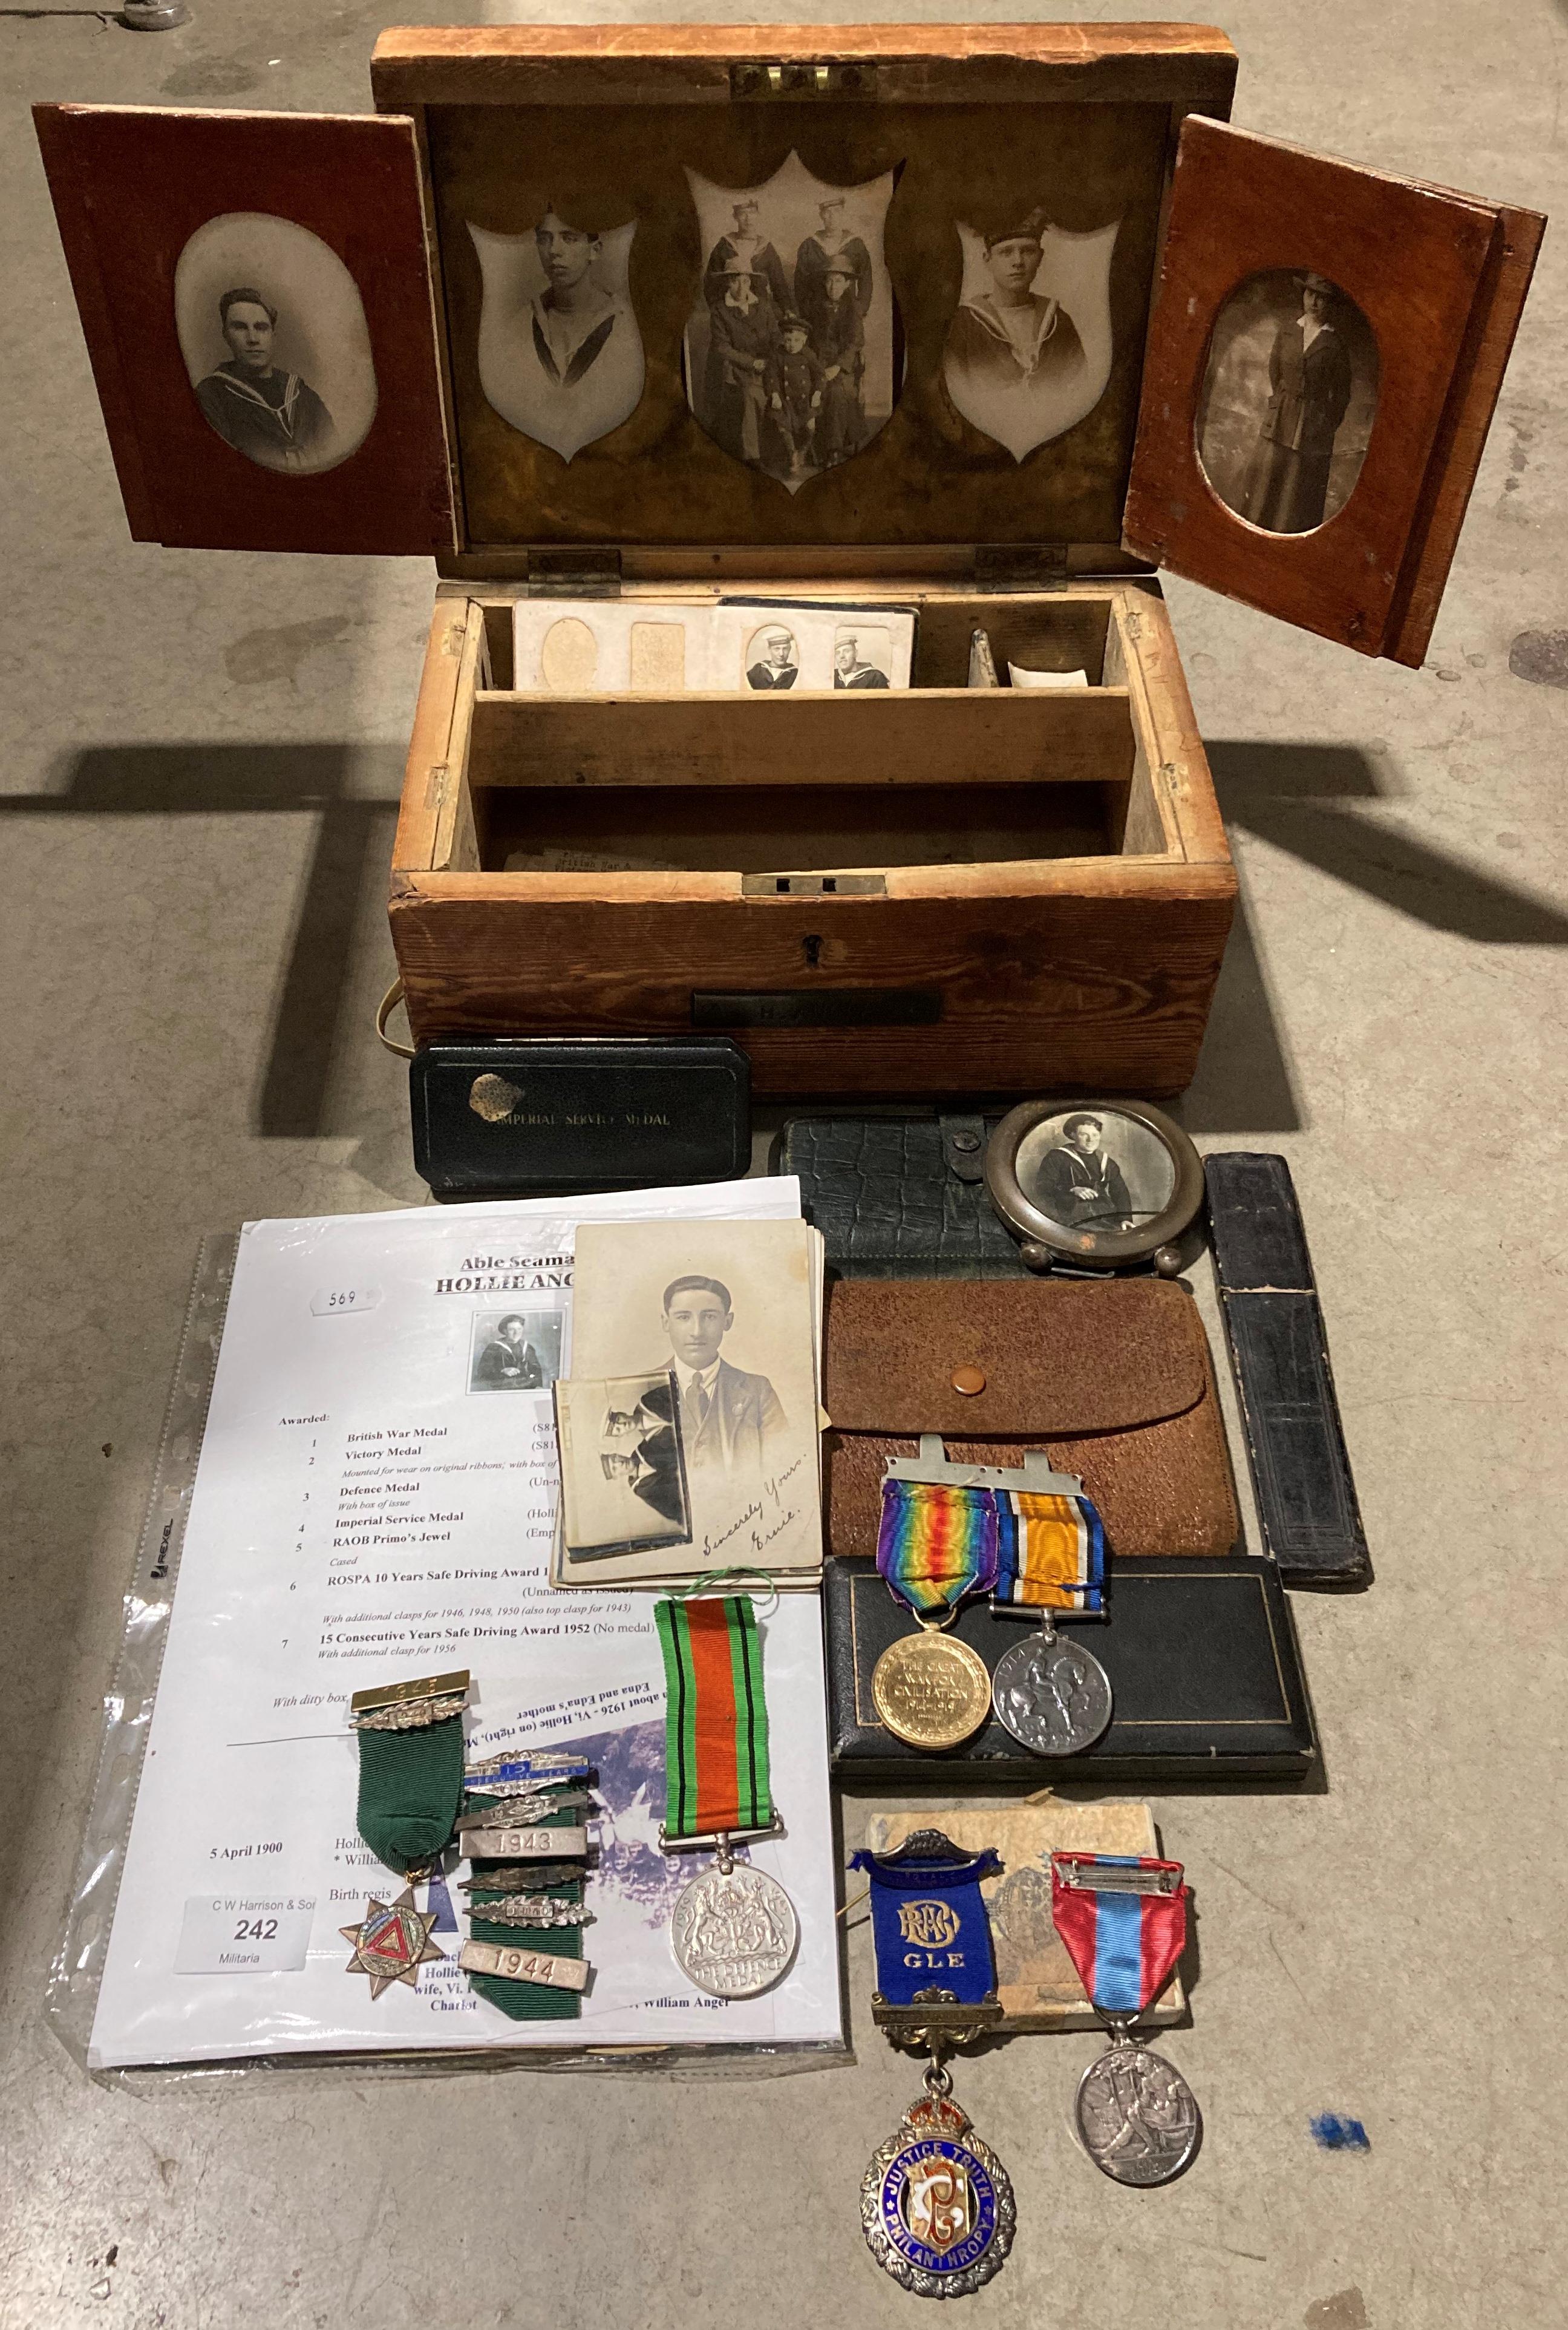 Sailor's Ditty Box with Medals/Photographs, Original letters, diary etc. to S8185 H.ANGER ORD. R.N.